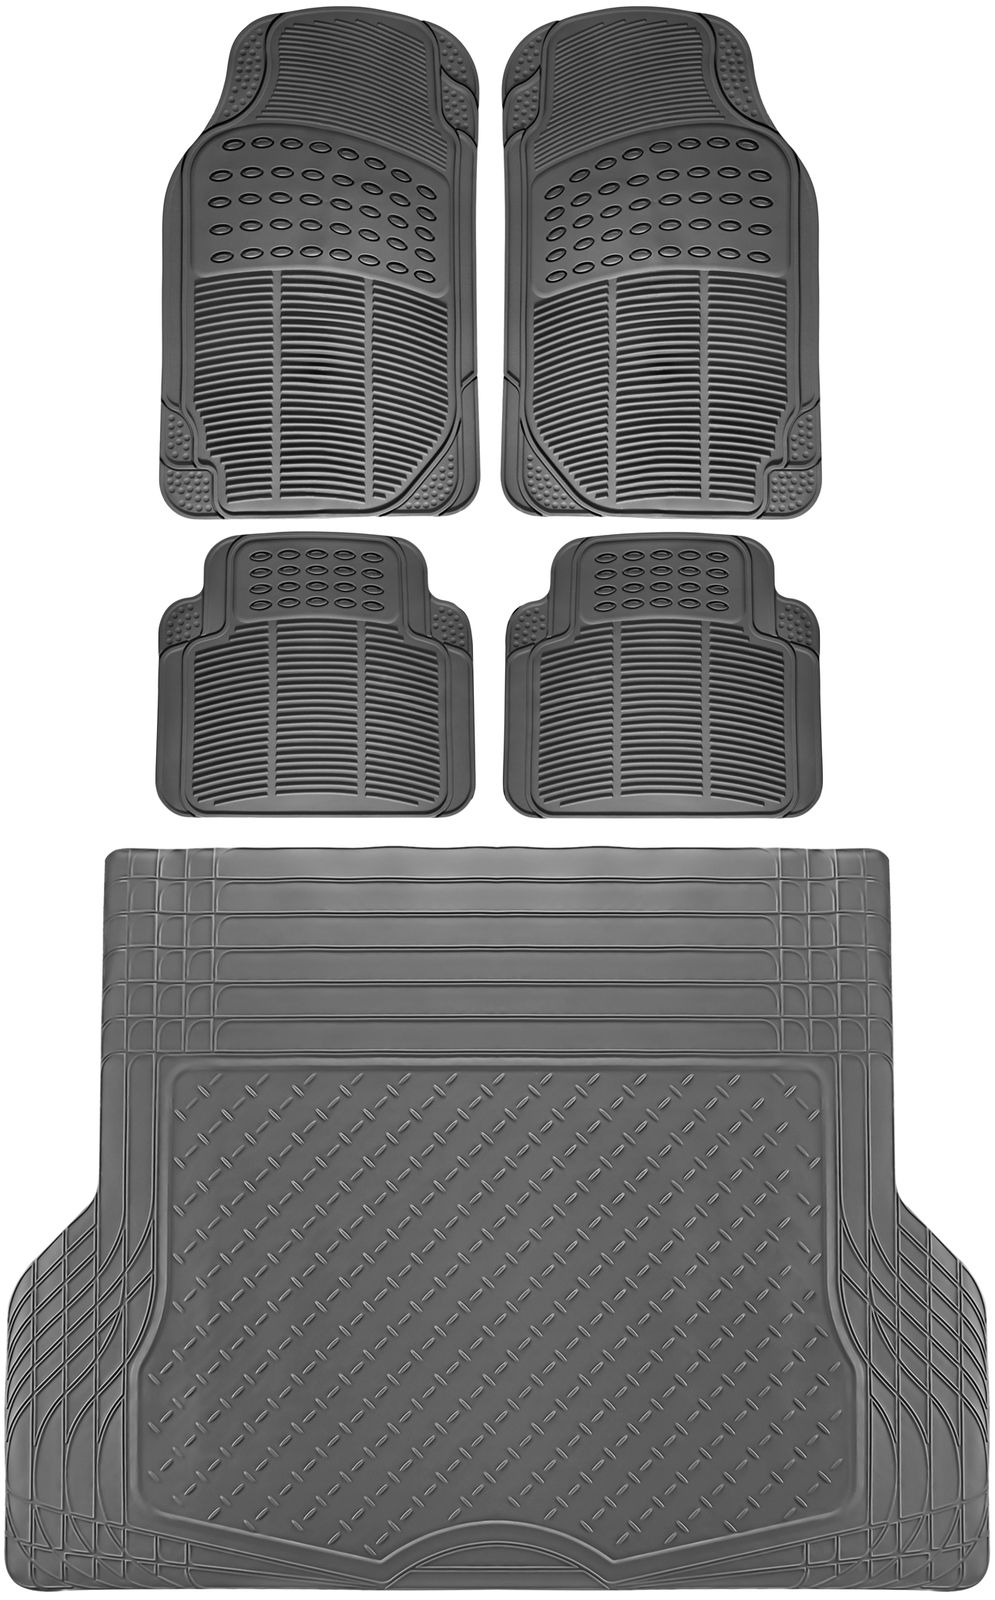 AwesomeAmazingGreat 5pc All Weather Heavy Duty Rubber SUV Floor Mat Gray 2 Row Amp Trunk Liner 3A 2017 20182018 201920172018 